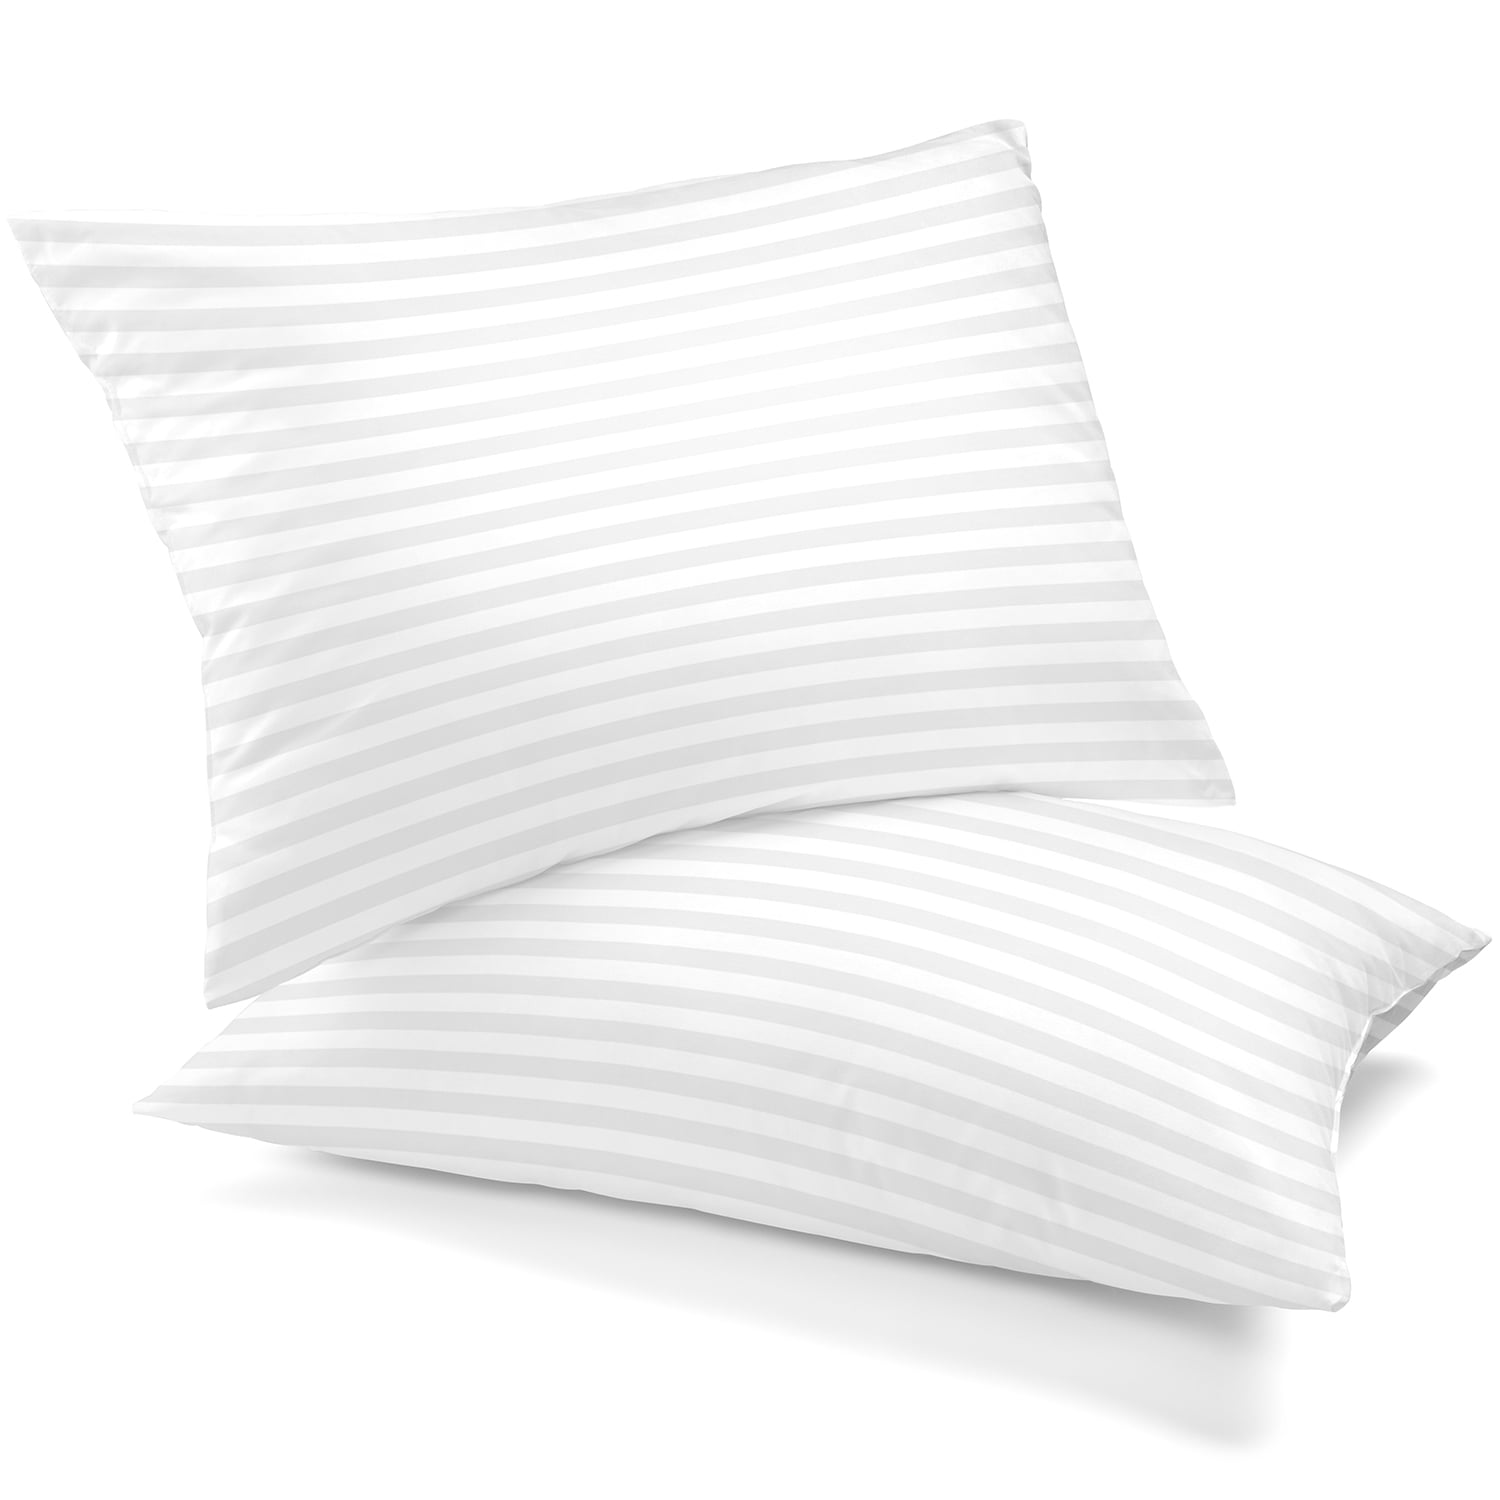 900Gsm Ultra Soft Sand Washed 20 X 26 Inches Celeep 2-Pack Queen Bed Pillows 